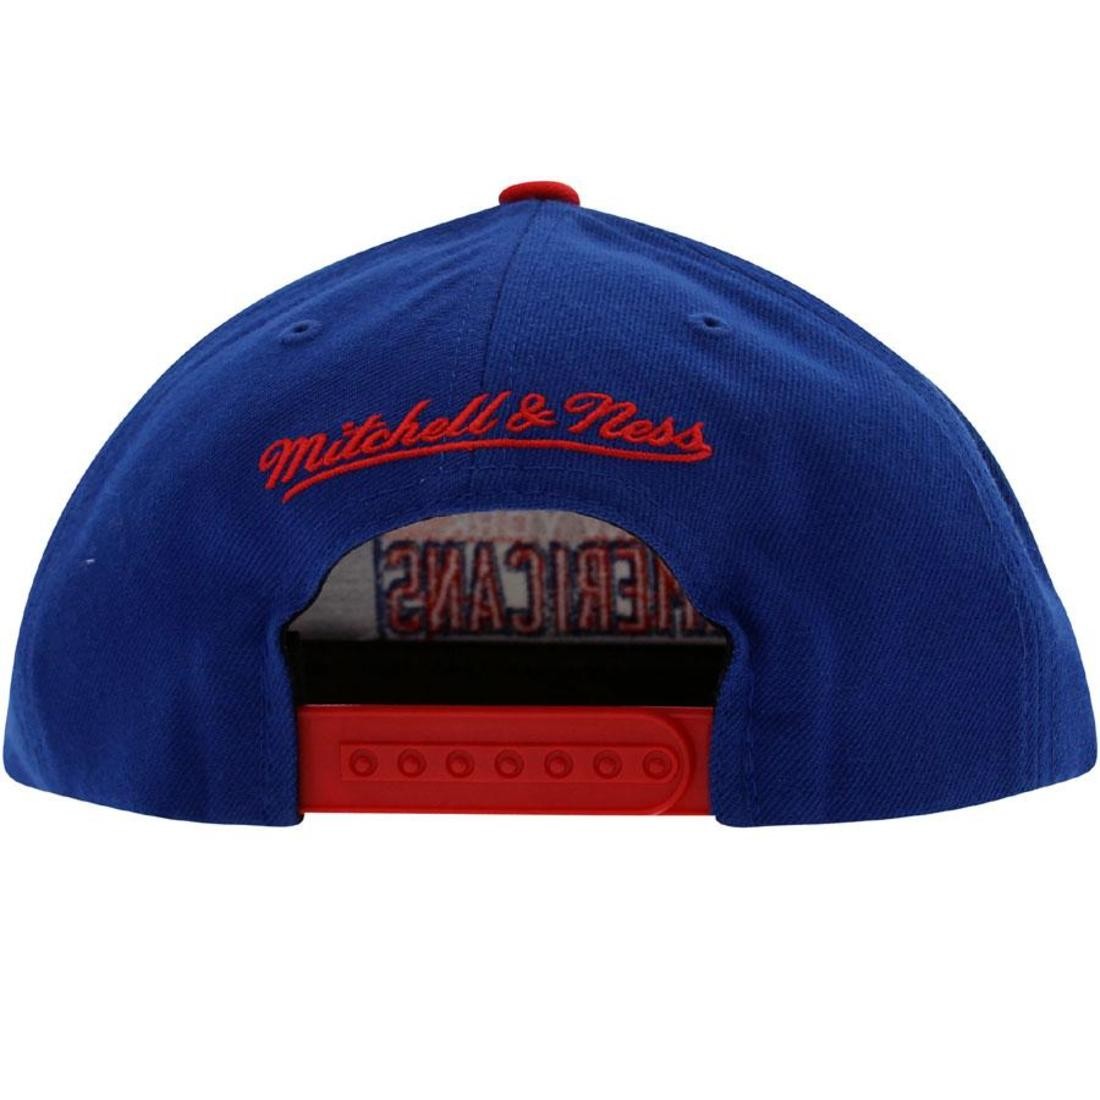 New York Americans Snapback Mitchell & Ness Throwback Cap Hat